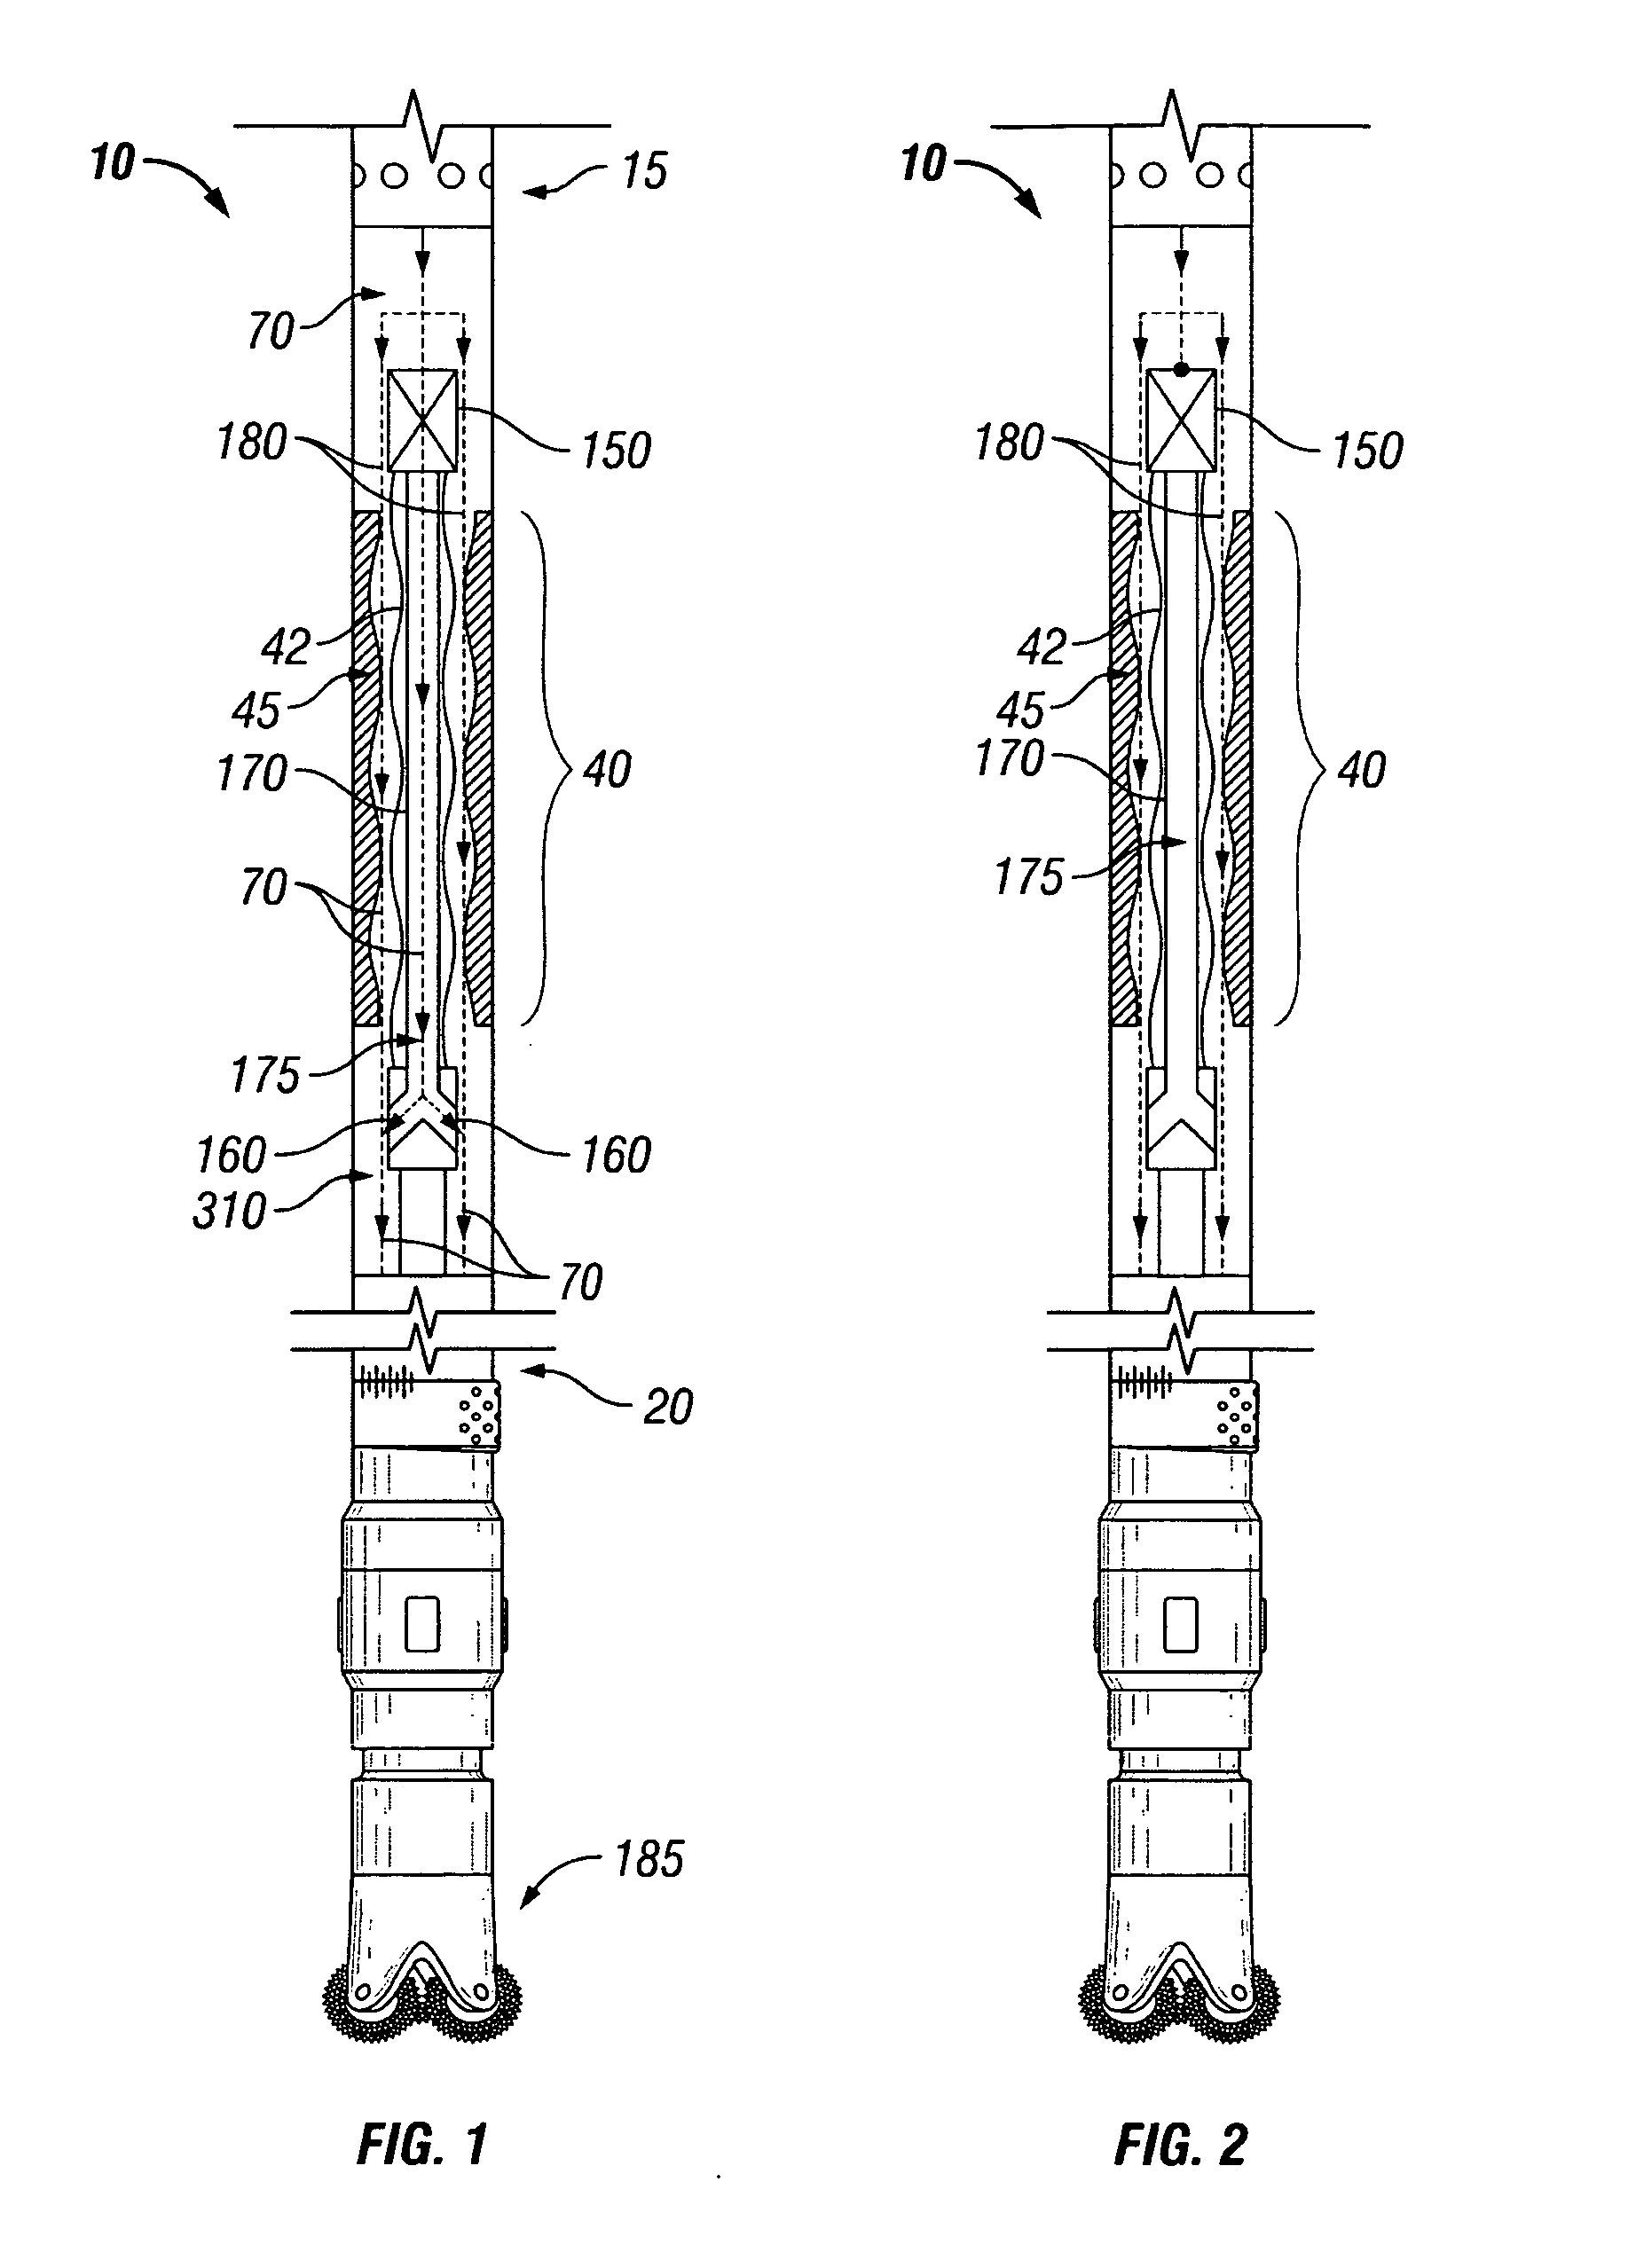 Method and apparatus for shifting speeds in a fluid-actuated motor